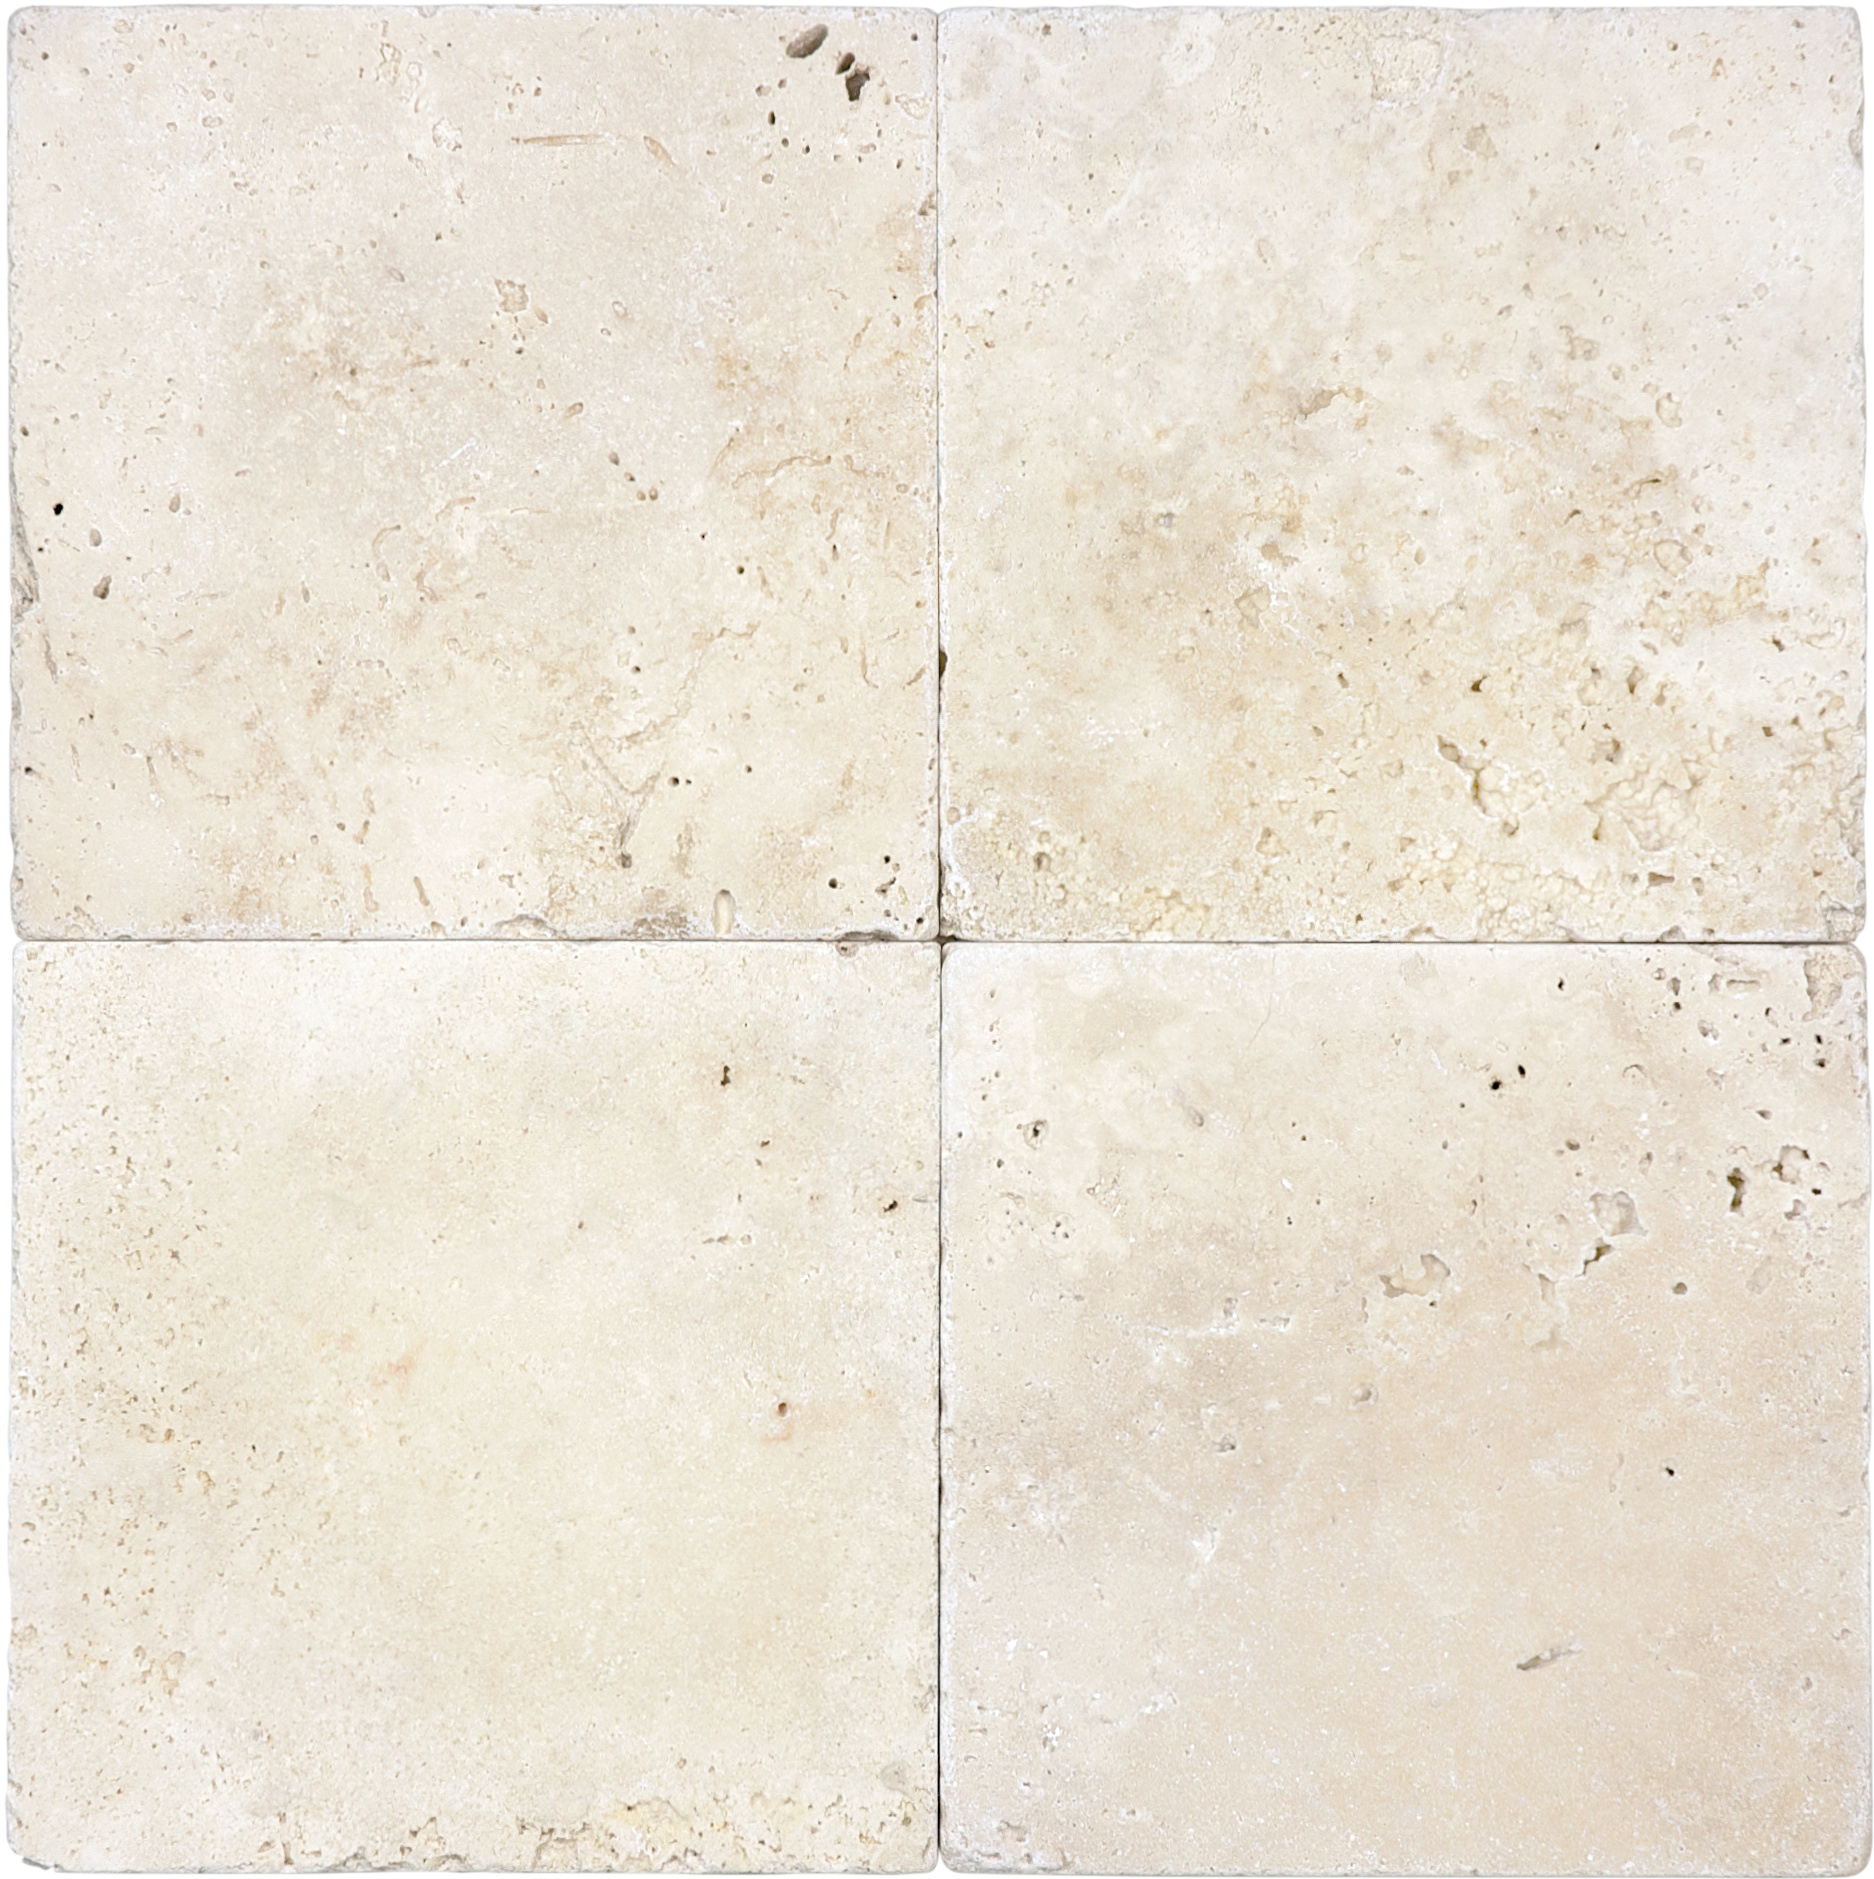 travertine pattern natural stone field tile from ivory anatolia collection distributed by surface group international tumbled finish tumbled edge 6x6 square shape